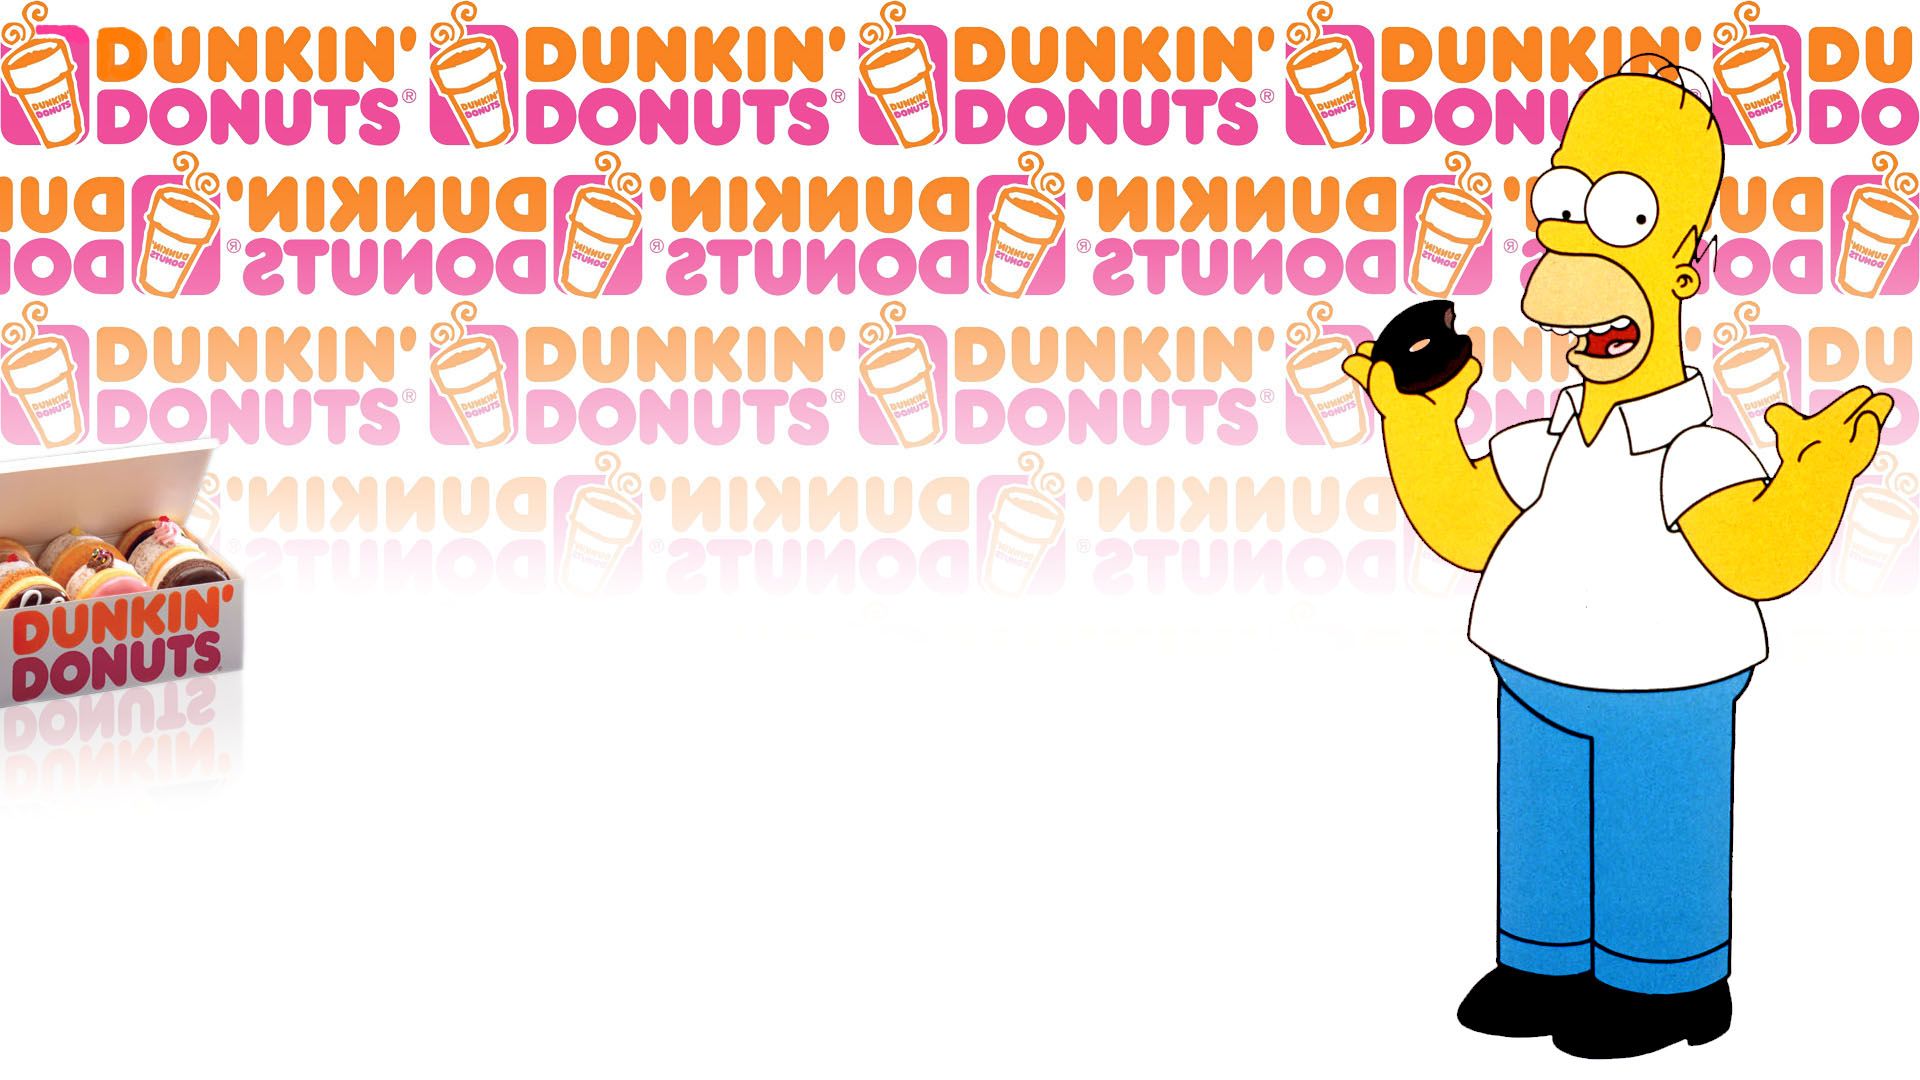 Homer Simpson, donuts, The Simpsons, Dunkin' Donuts